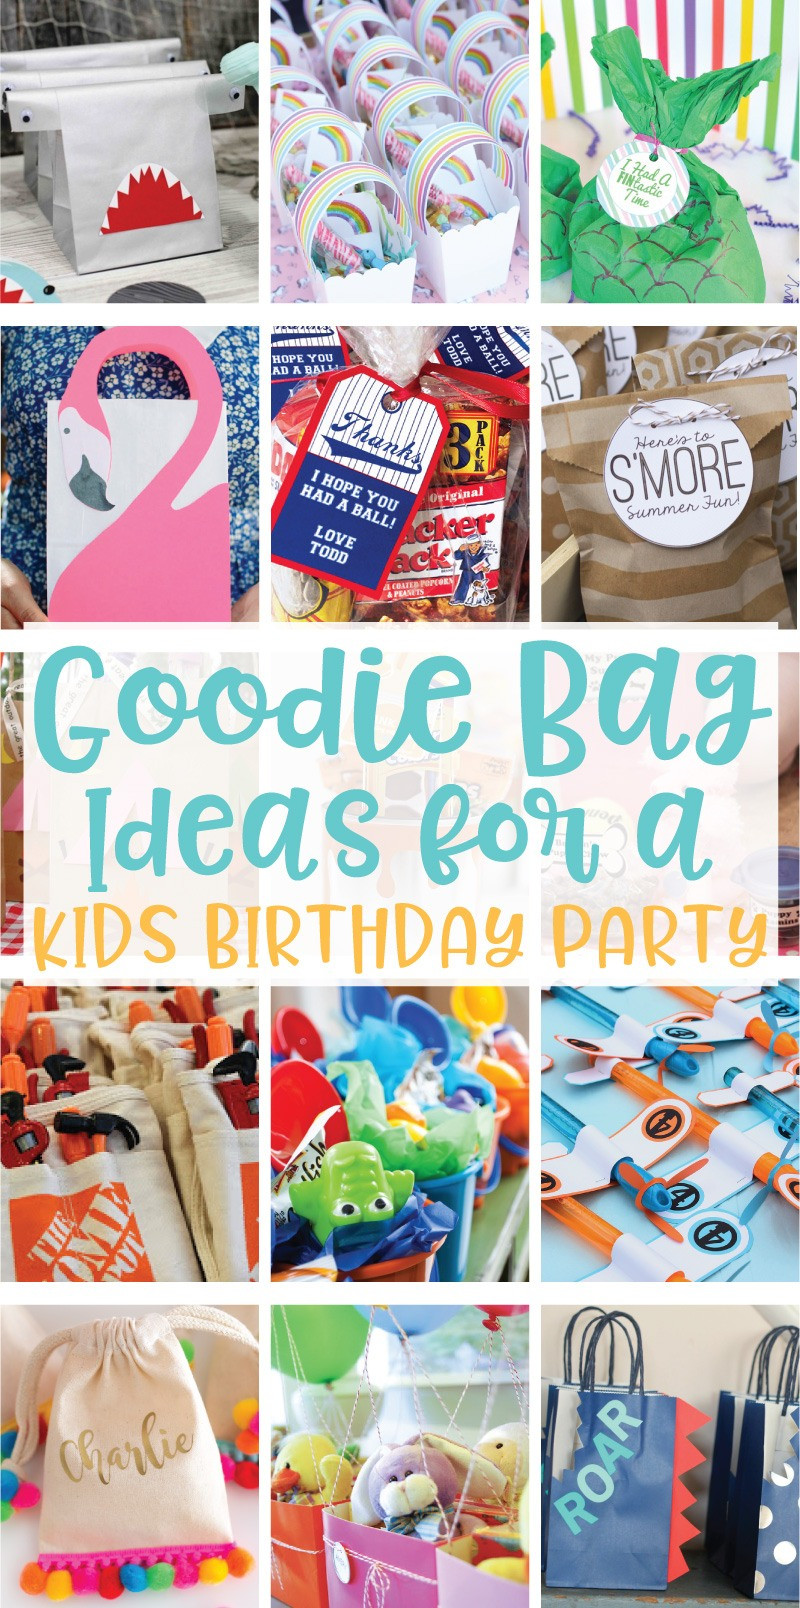 Gift Bags For Kids
 20 Creative Goo Bag Ideas for Kids Birthday Parties on